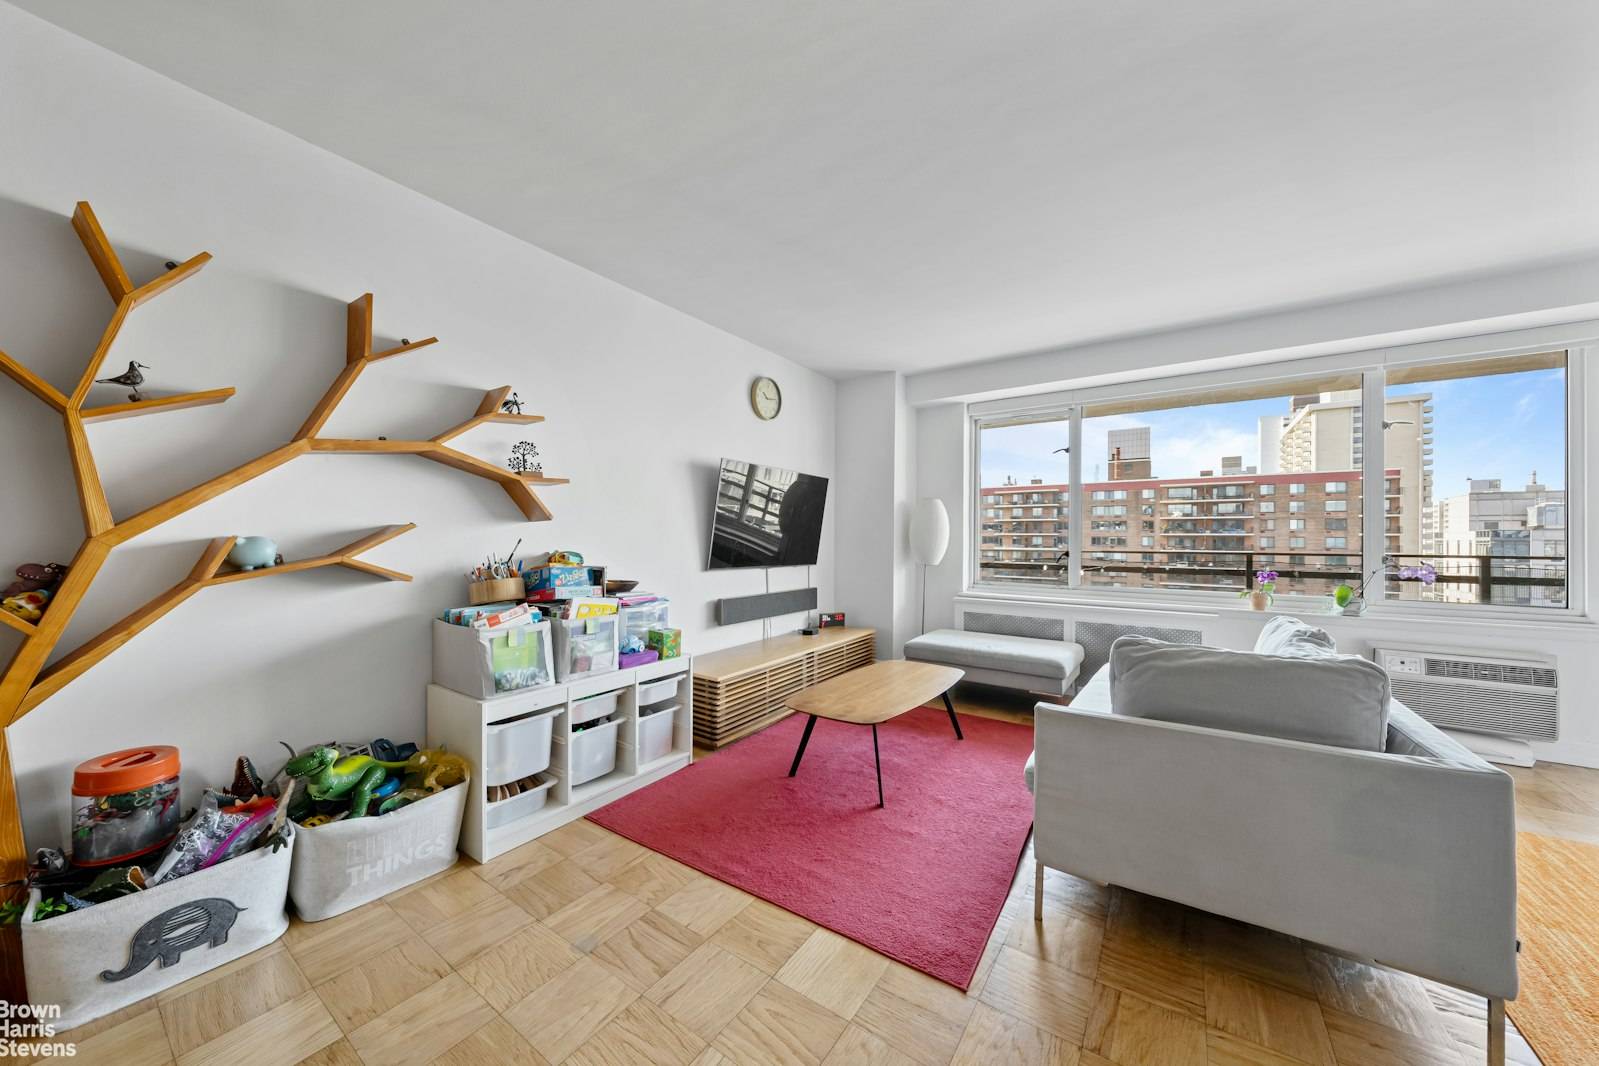 This Large and flexible 1 Bedroom, 1 Bath Condominium is located in one of New York City's premiere Upper West Side neighborhoods.